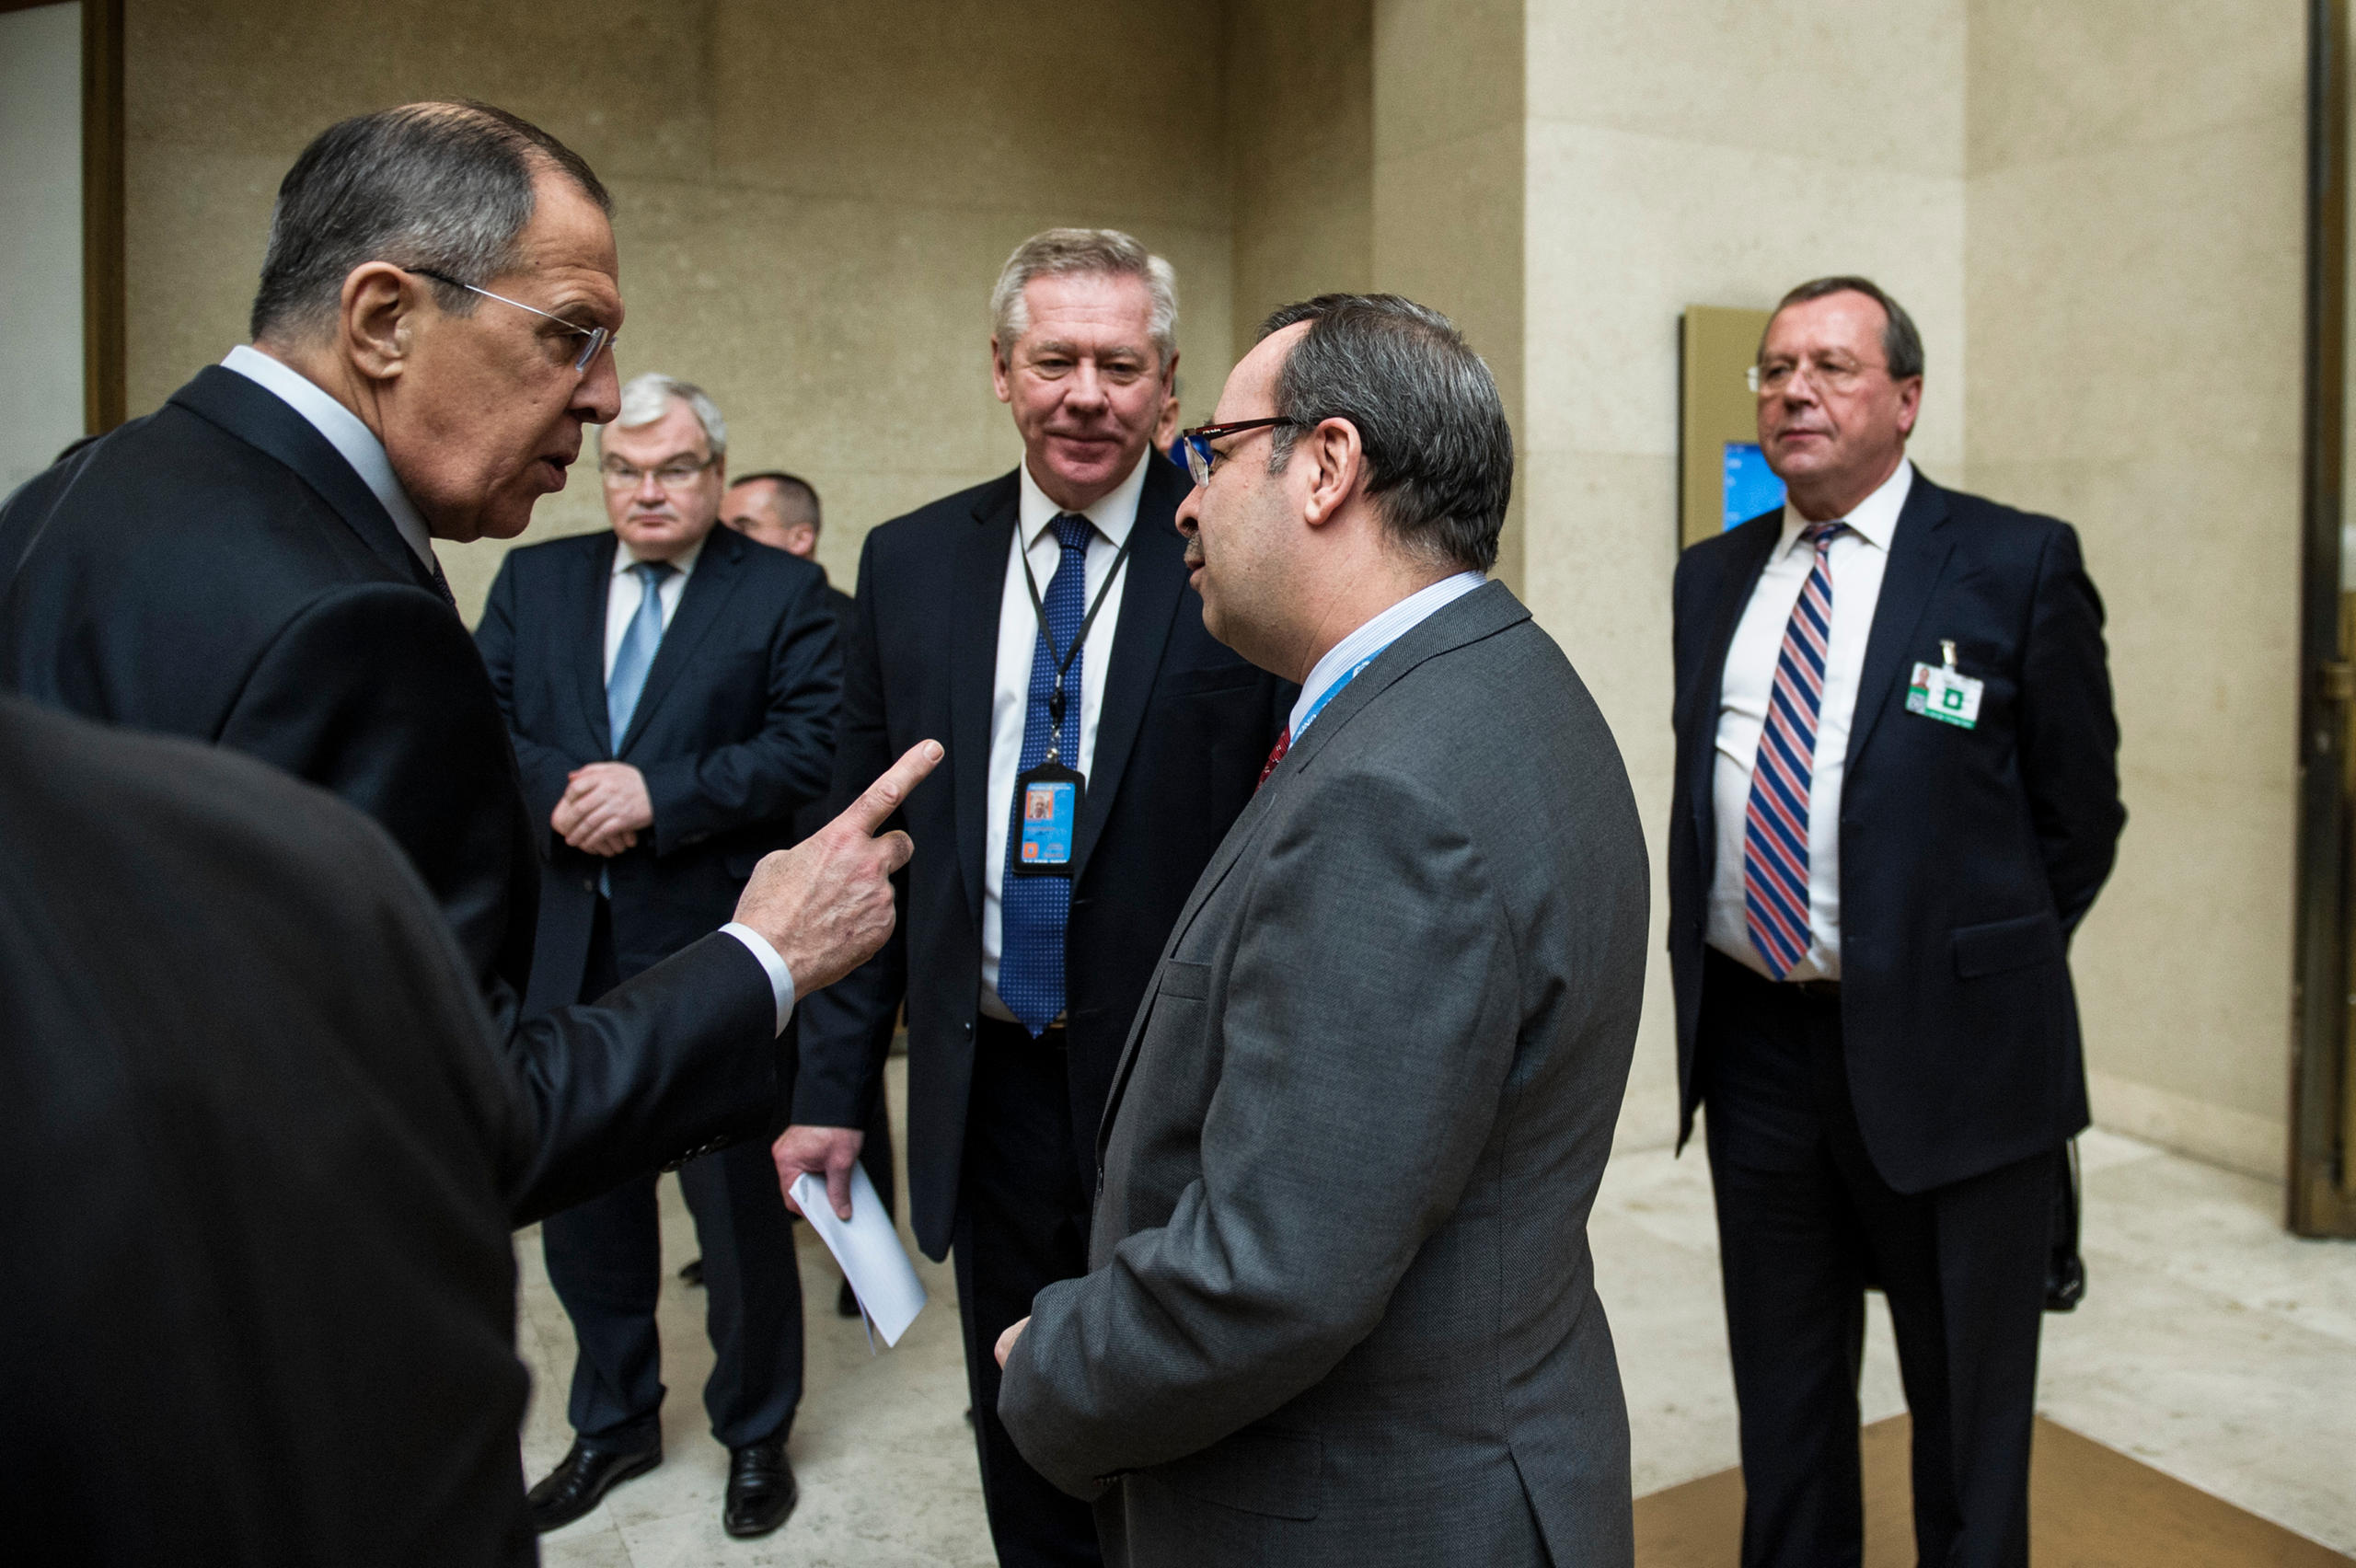 Sergie Lavrov in an exchange with the Syrian representative